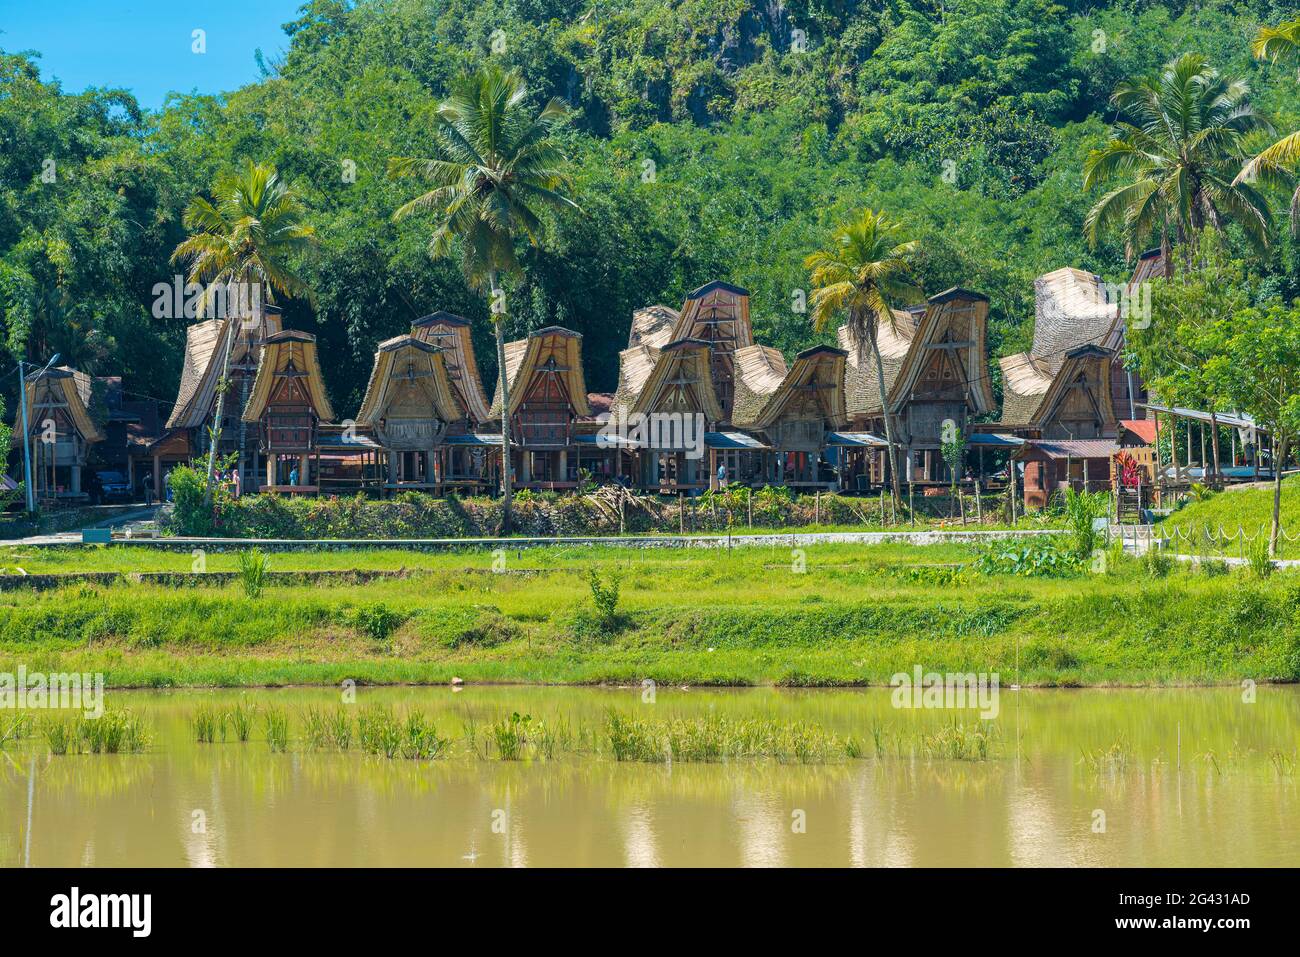 Kete Kesu is a village of Tana Toraja, known for its customs and traditional life Stock Photo